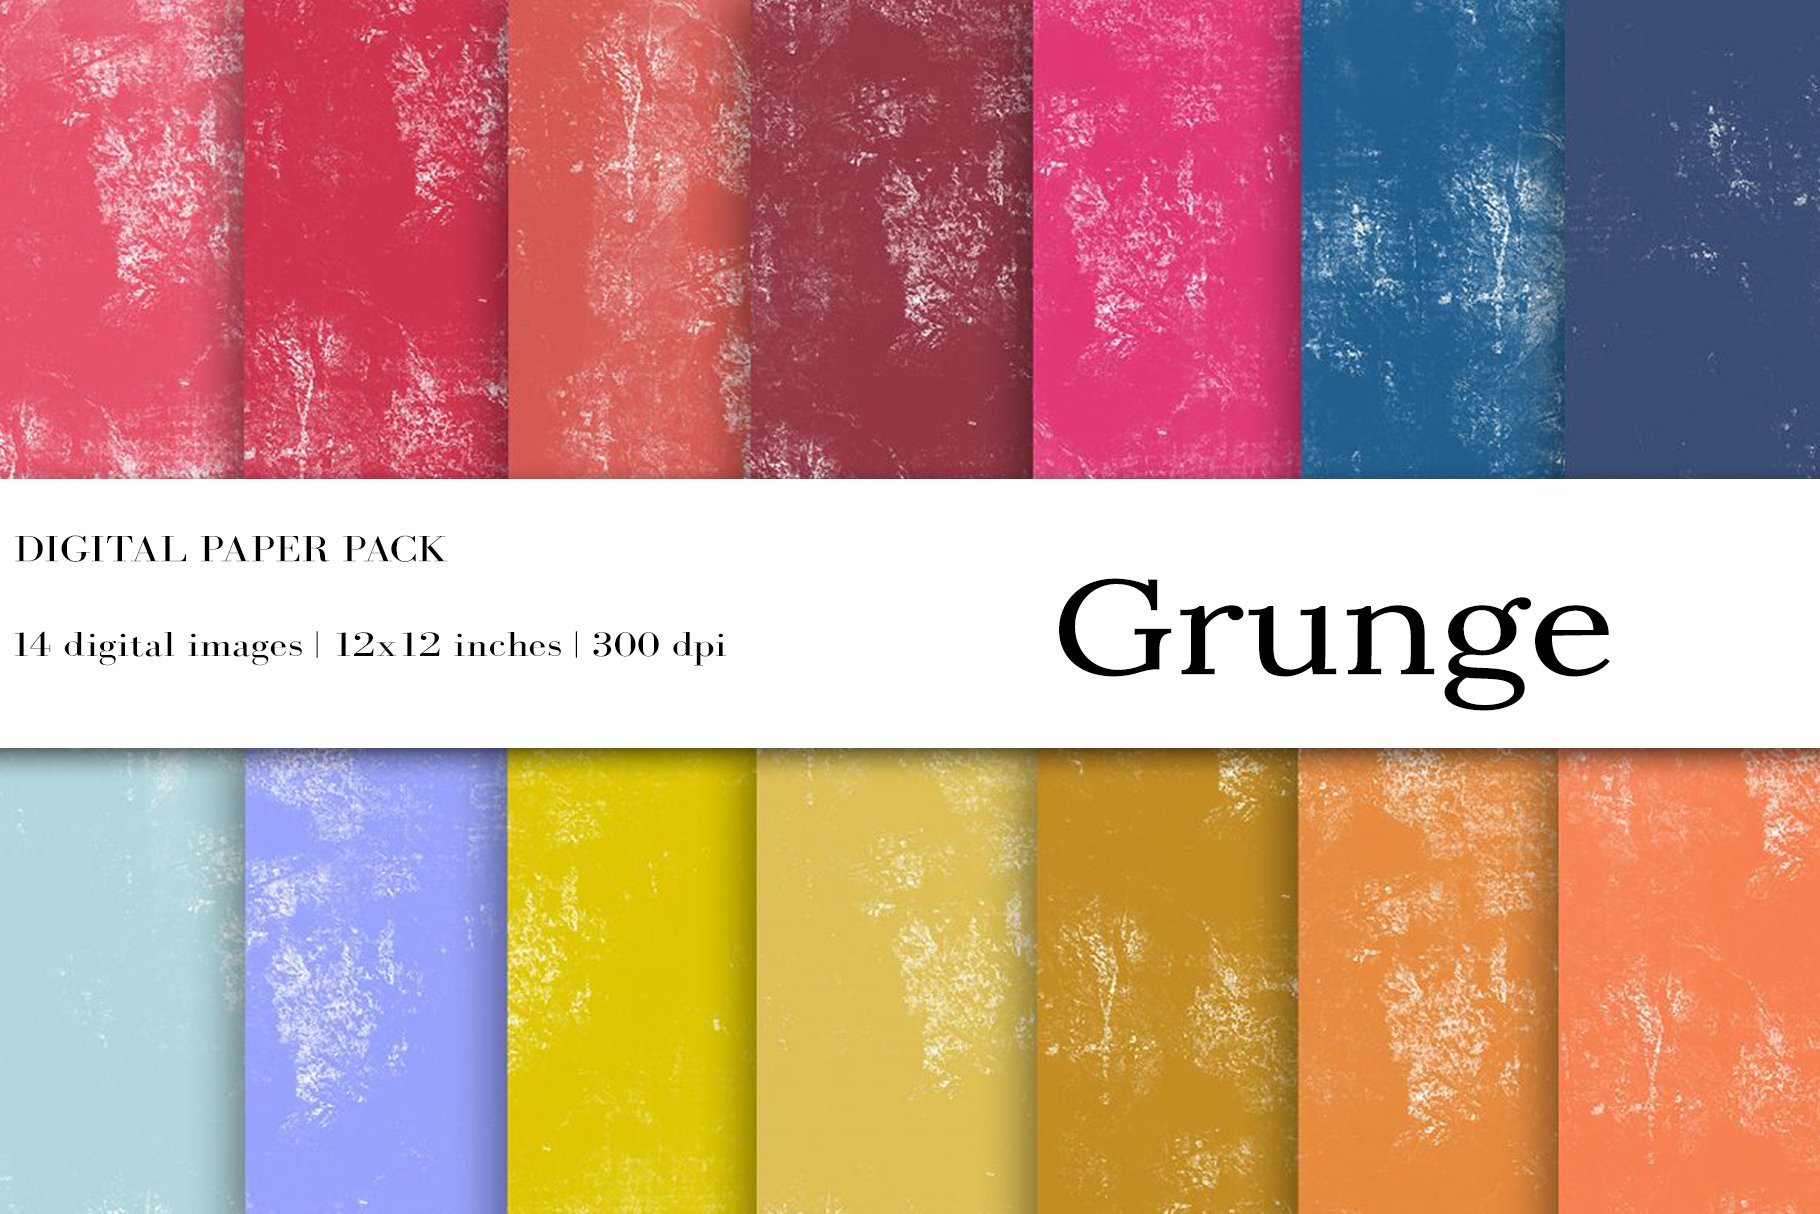 Grunge, Canvas Digital Papers cover image.